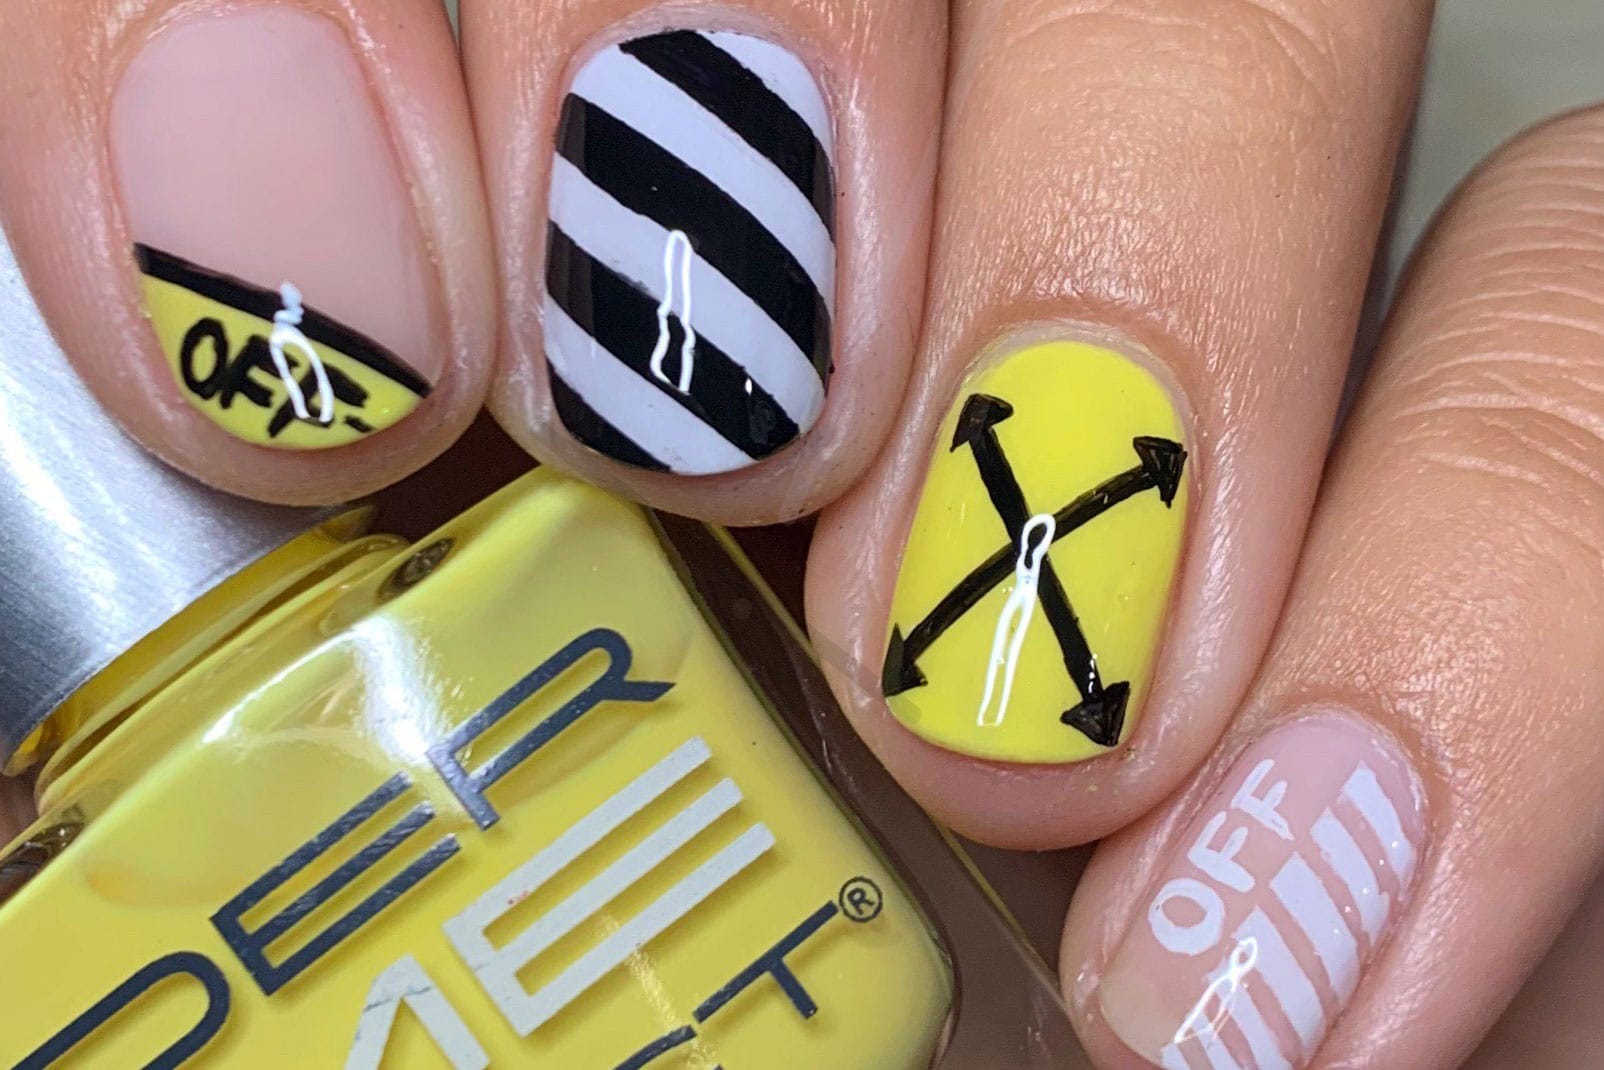 7 Nail Trends We're Forecasting for 2019